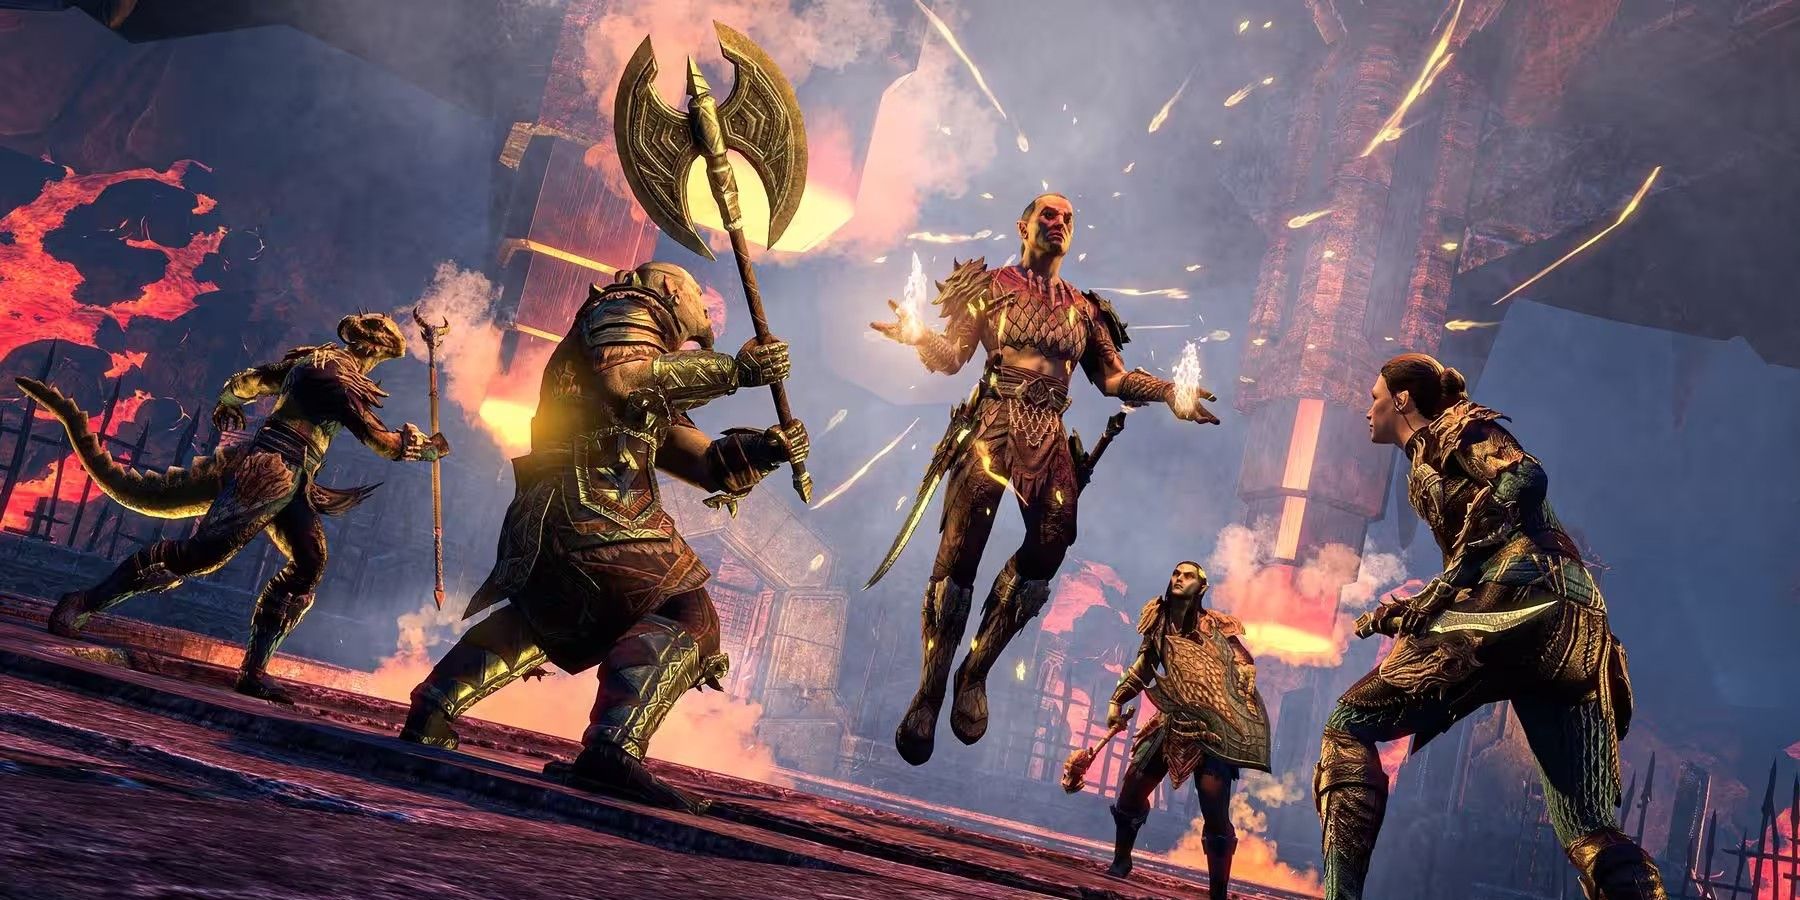 March 11 is a Big Day for The Elder Scrolls Online